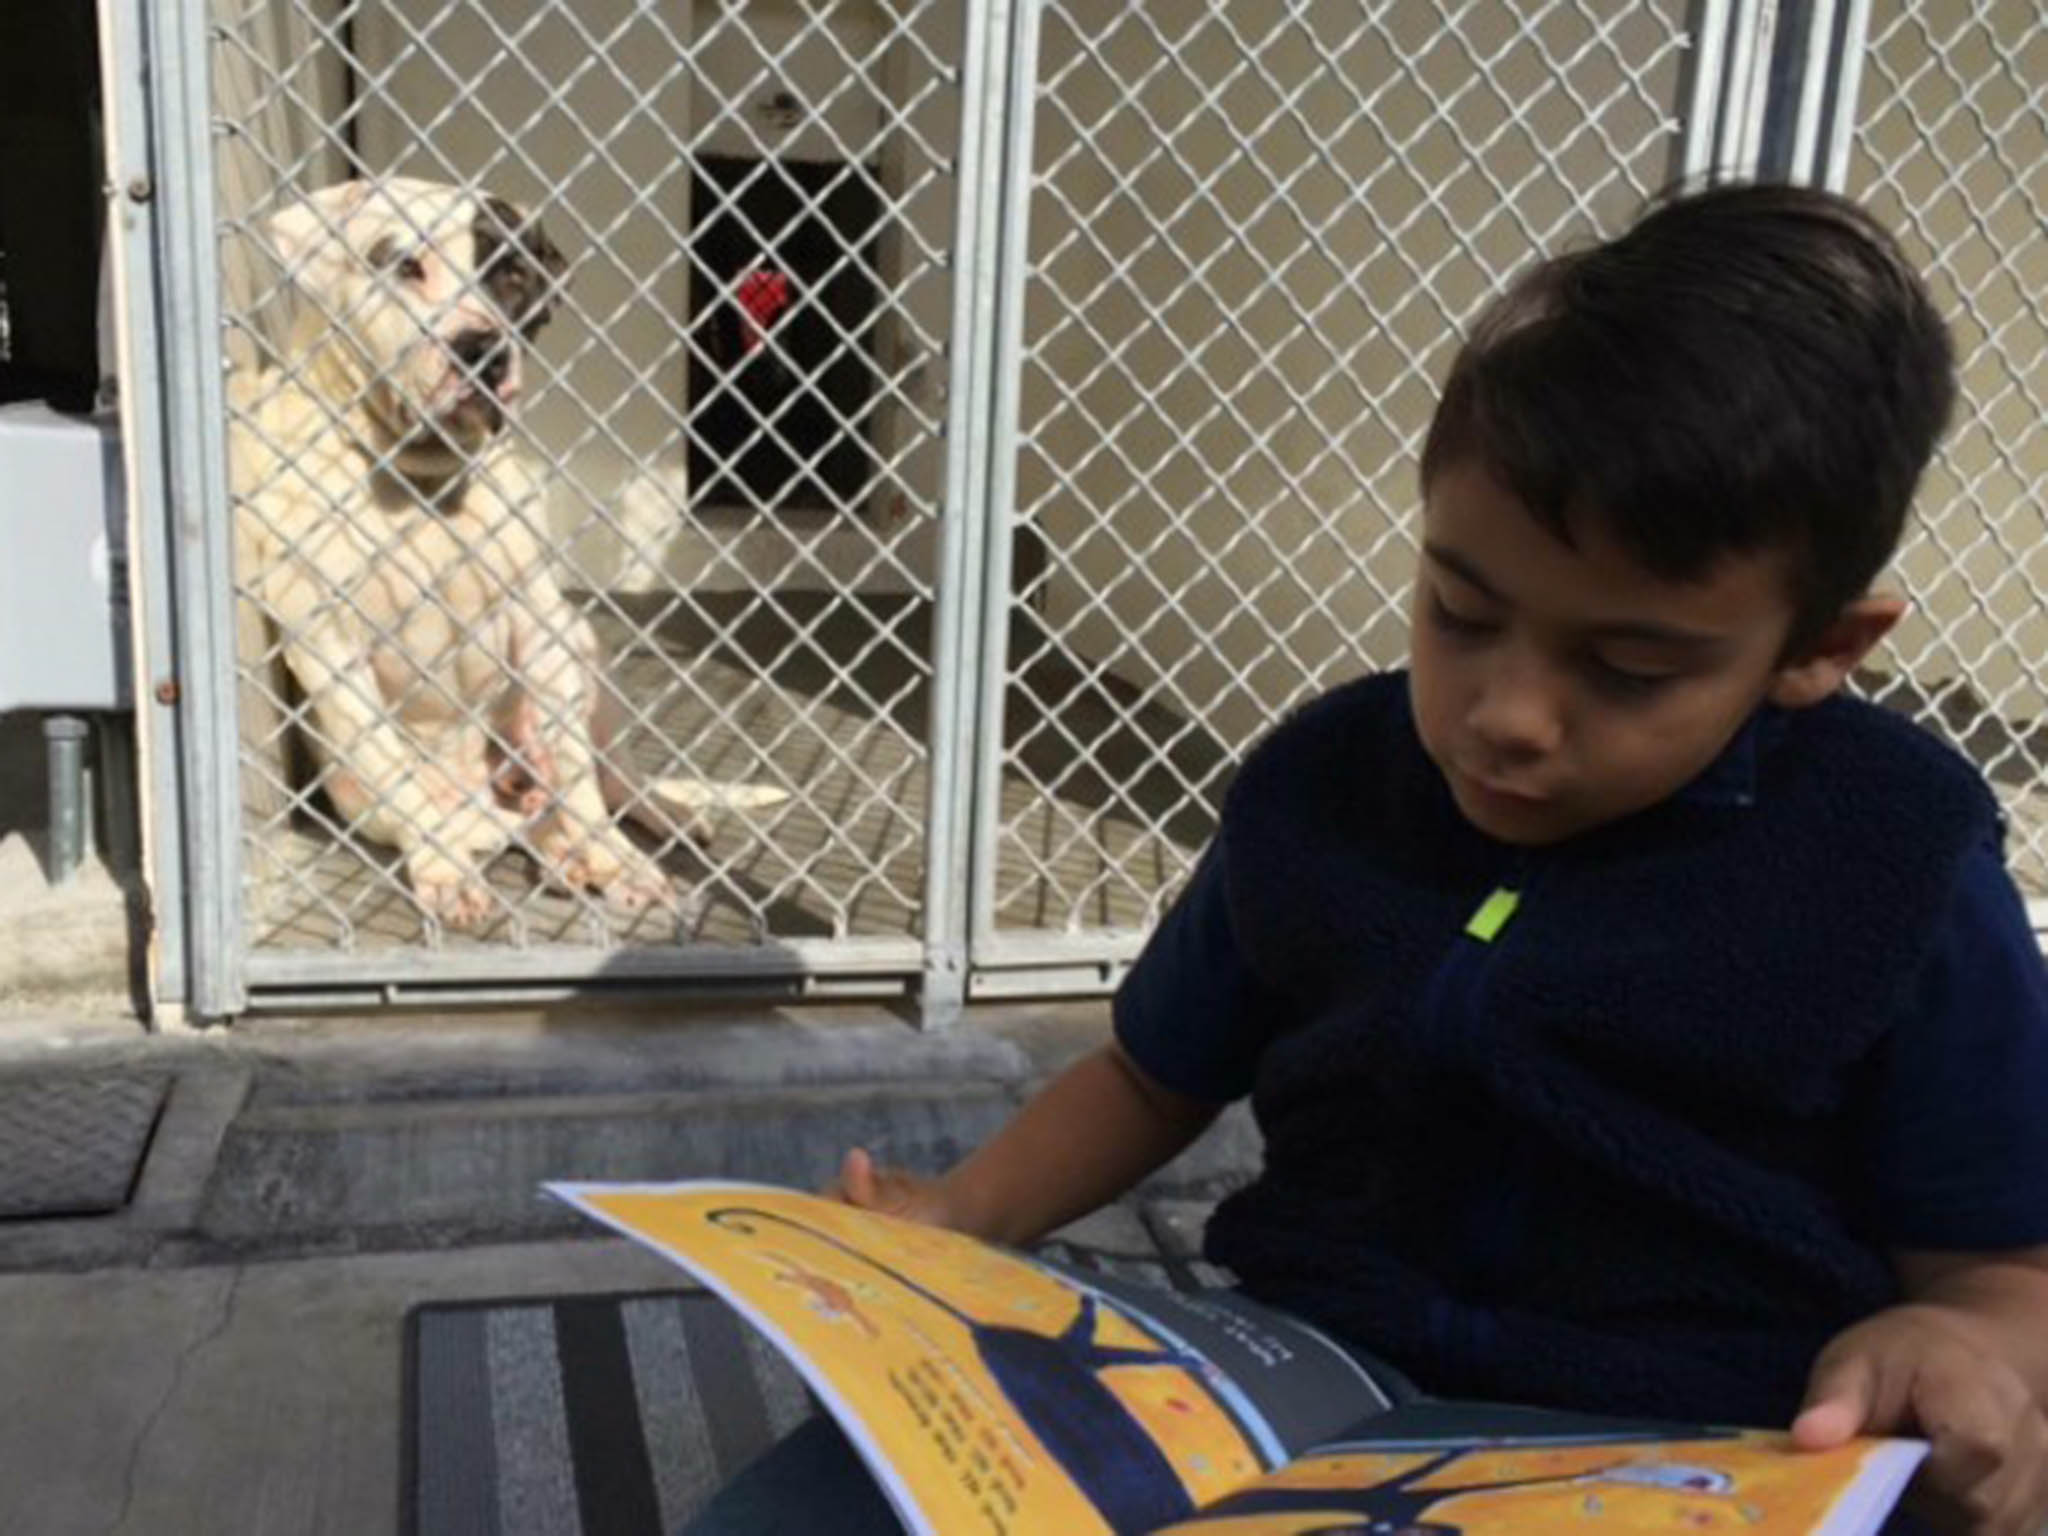 Jacob reading to one of the dogs at the Carson Animal Shelter, California